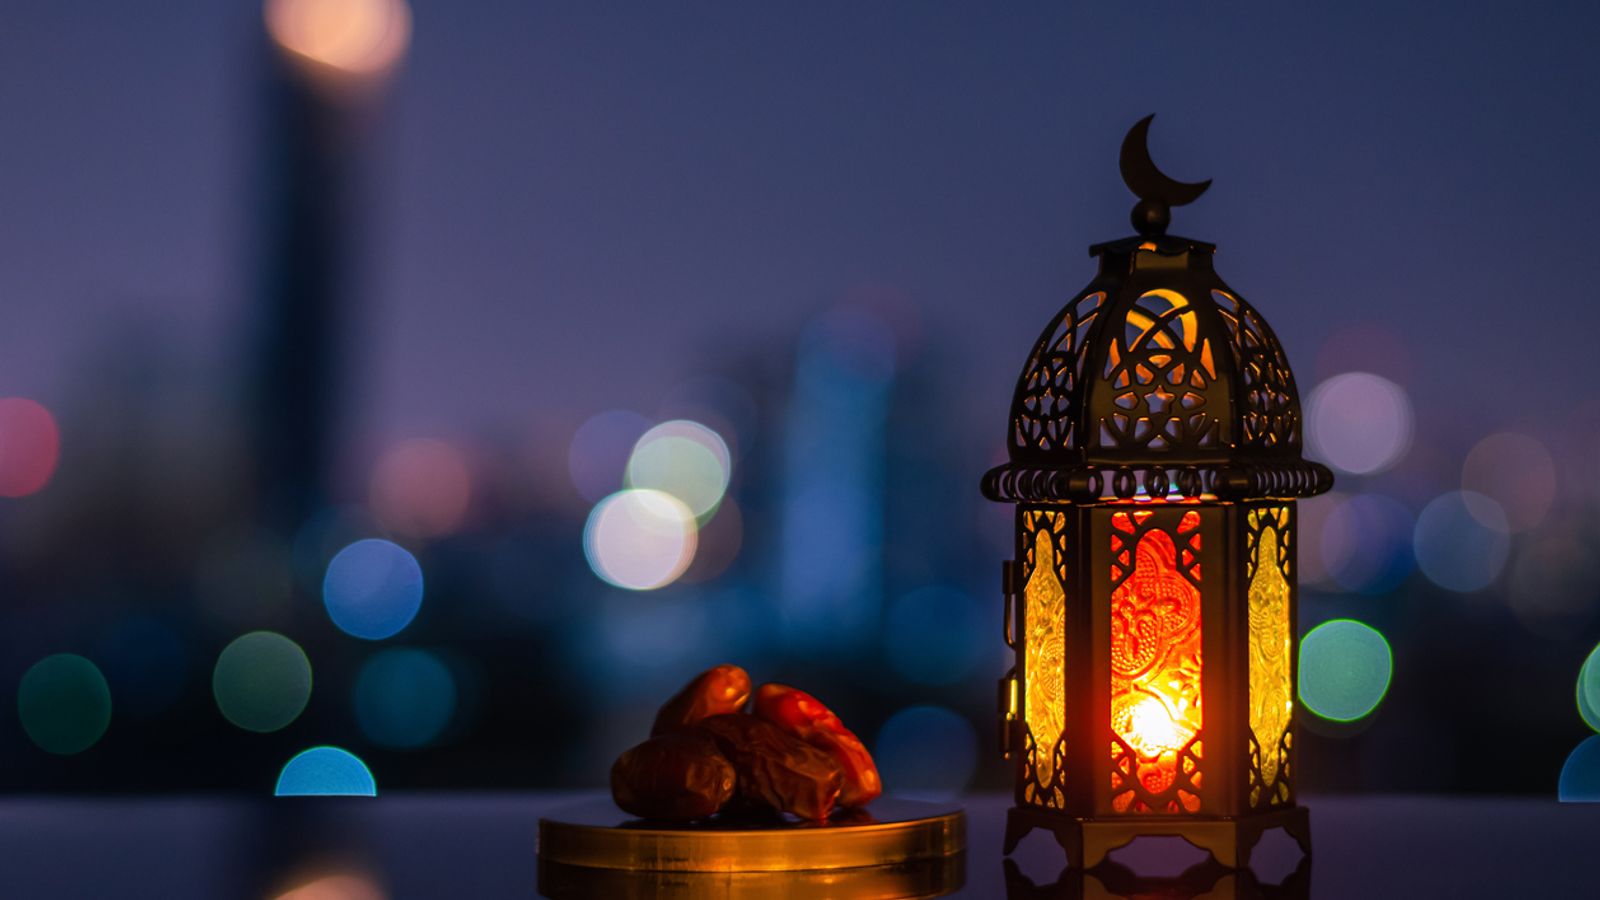 THE MEANING OF RAMADAN: THE HOLY MONTH FOR MUSLIMS WORLDWIDE